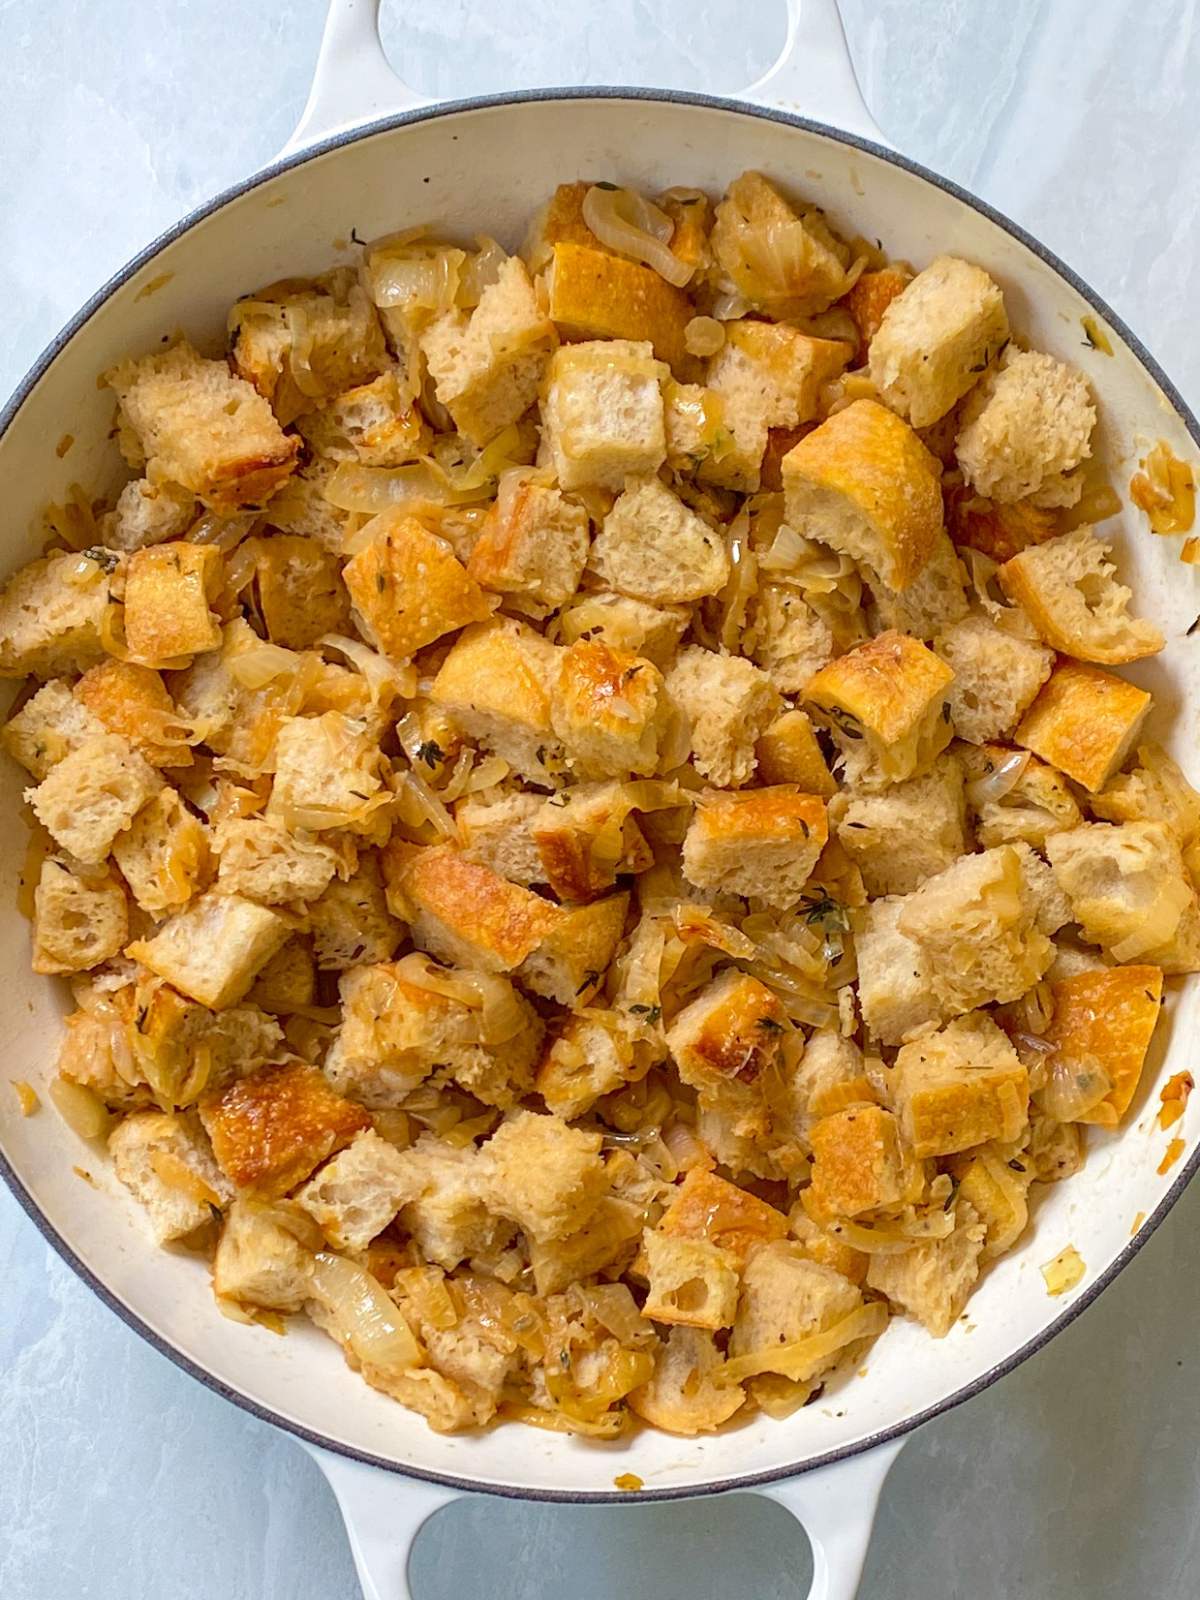 toasted bread cubes tossed in skillet with caramelized onions.